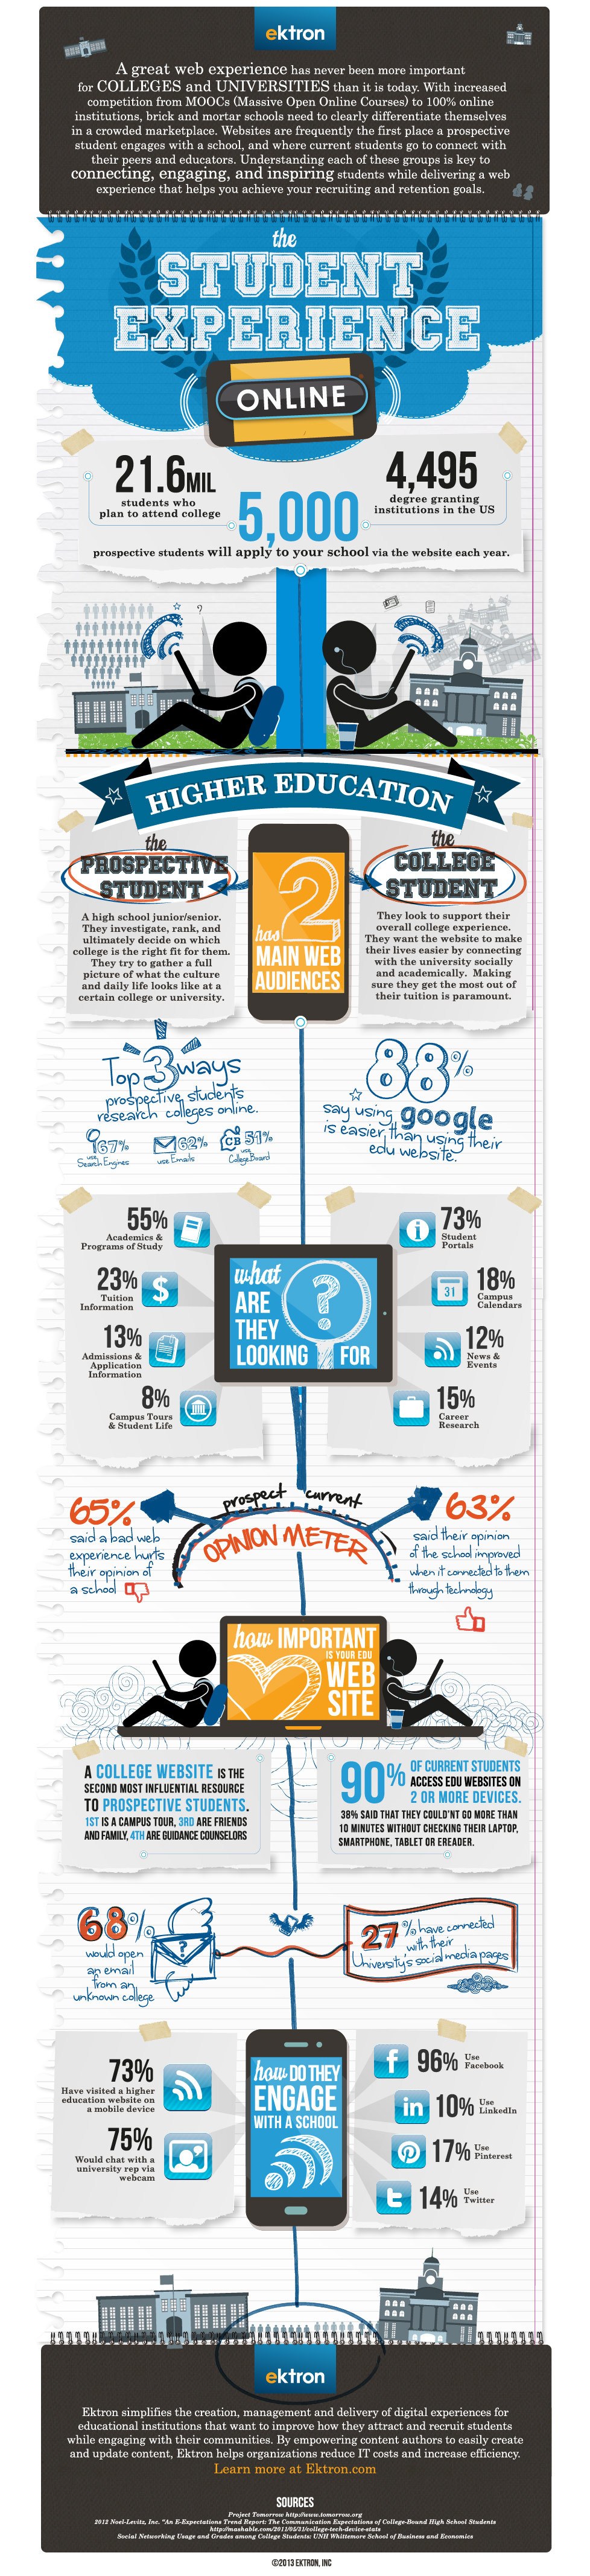 The Student Online Experience Infographic